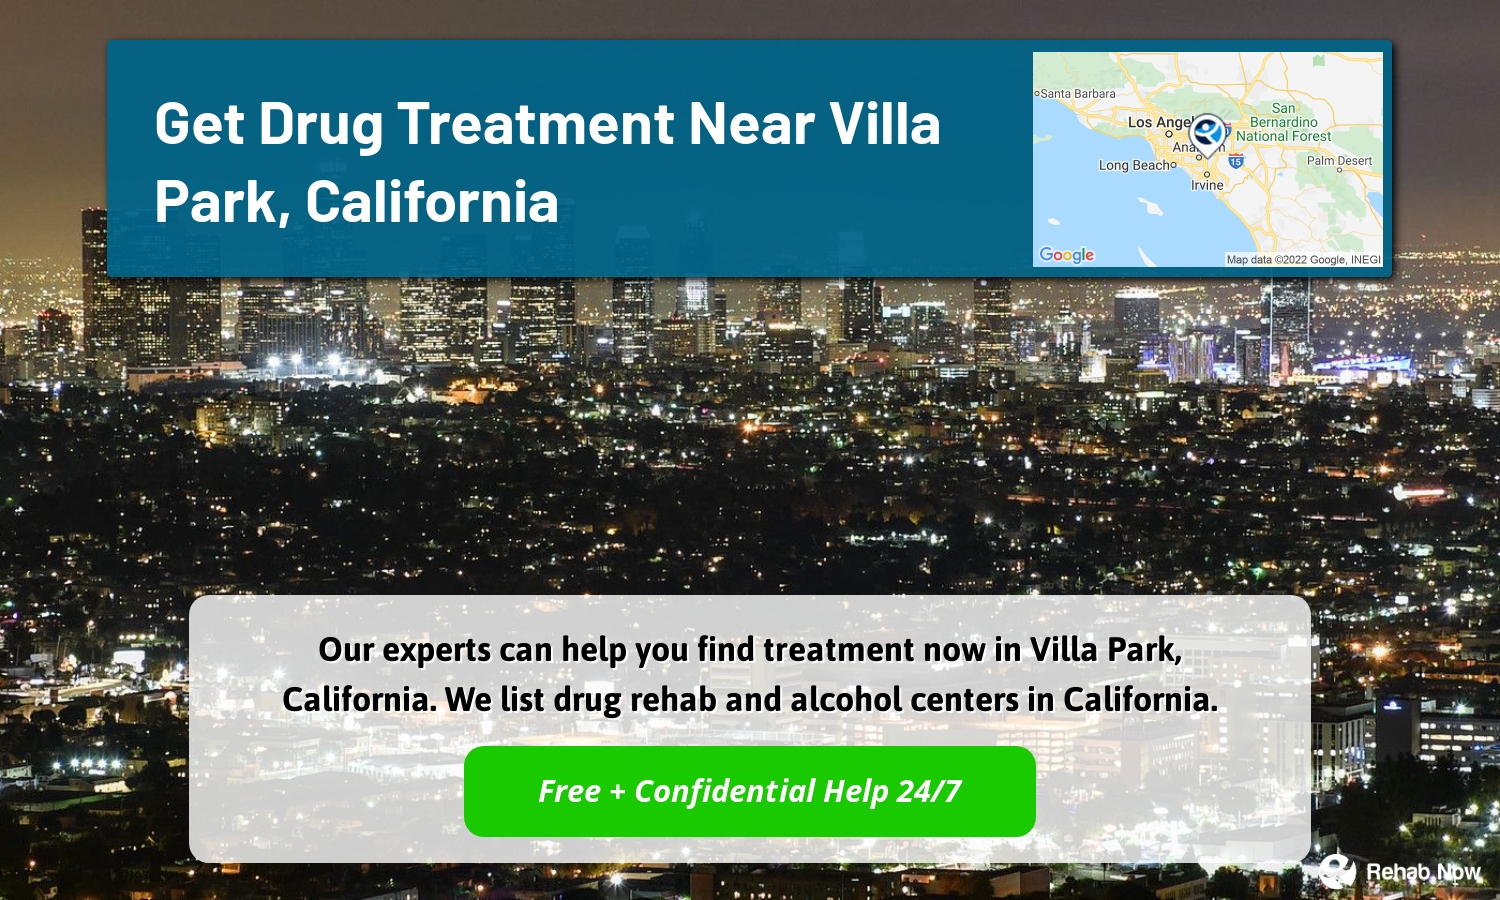 Our experts can help you find treatment now in Villa Park, California. We list drug rehab and alcohol centers in California.